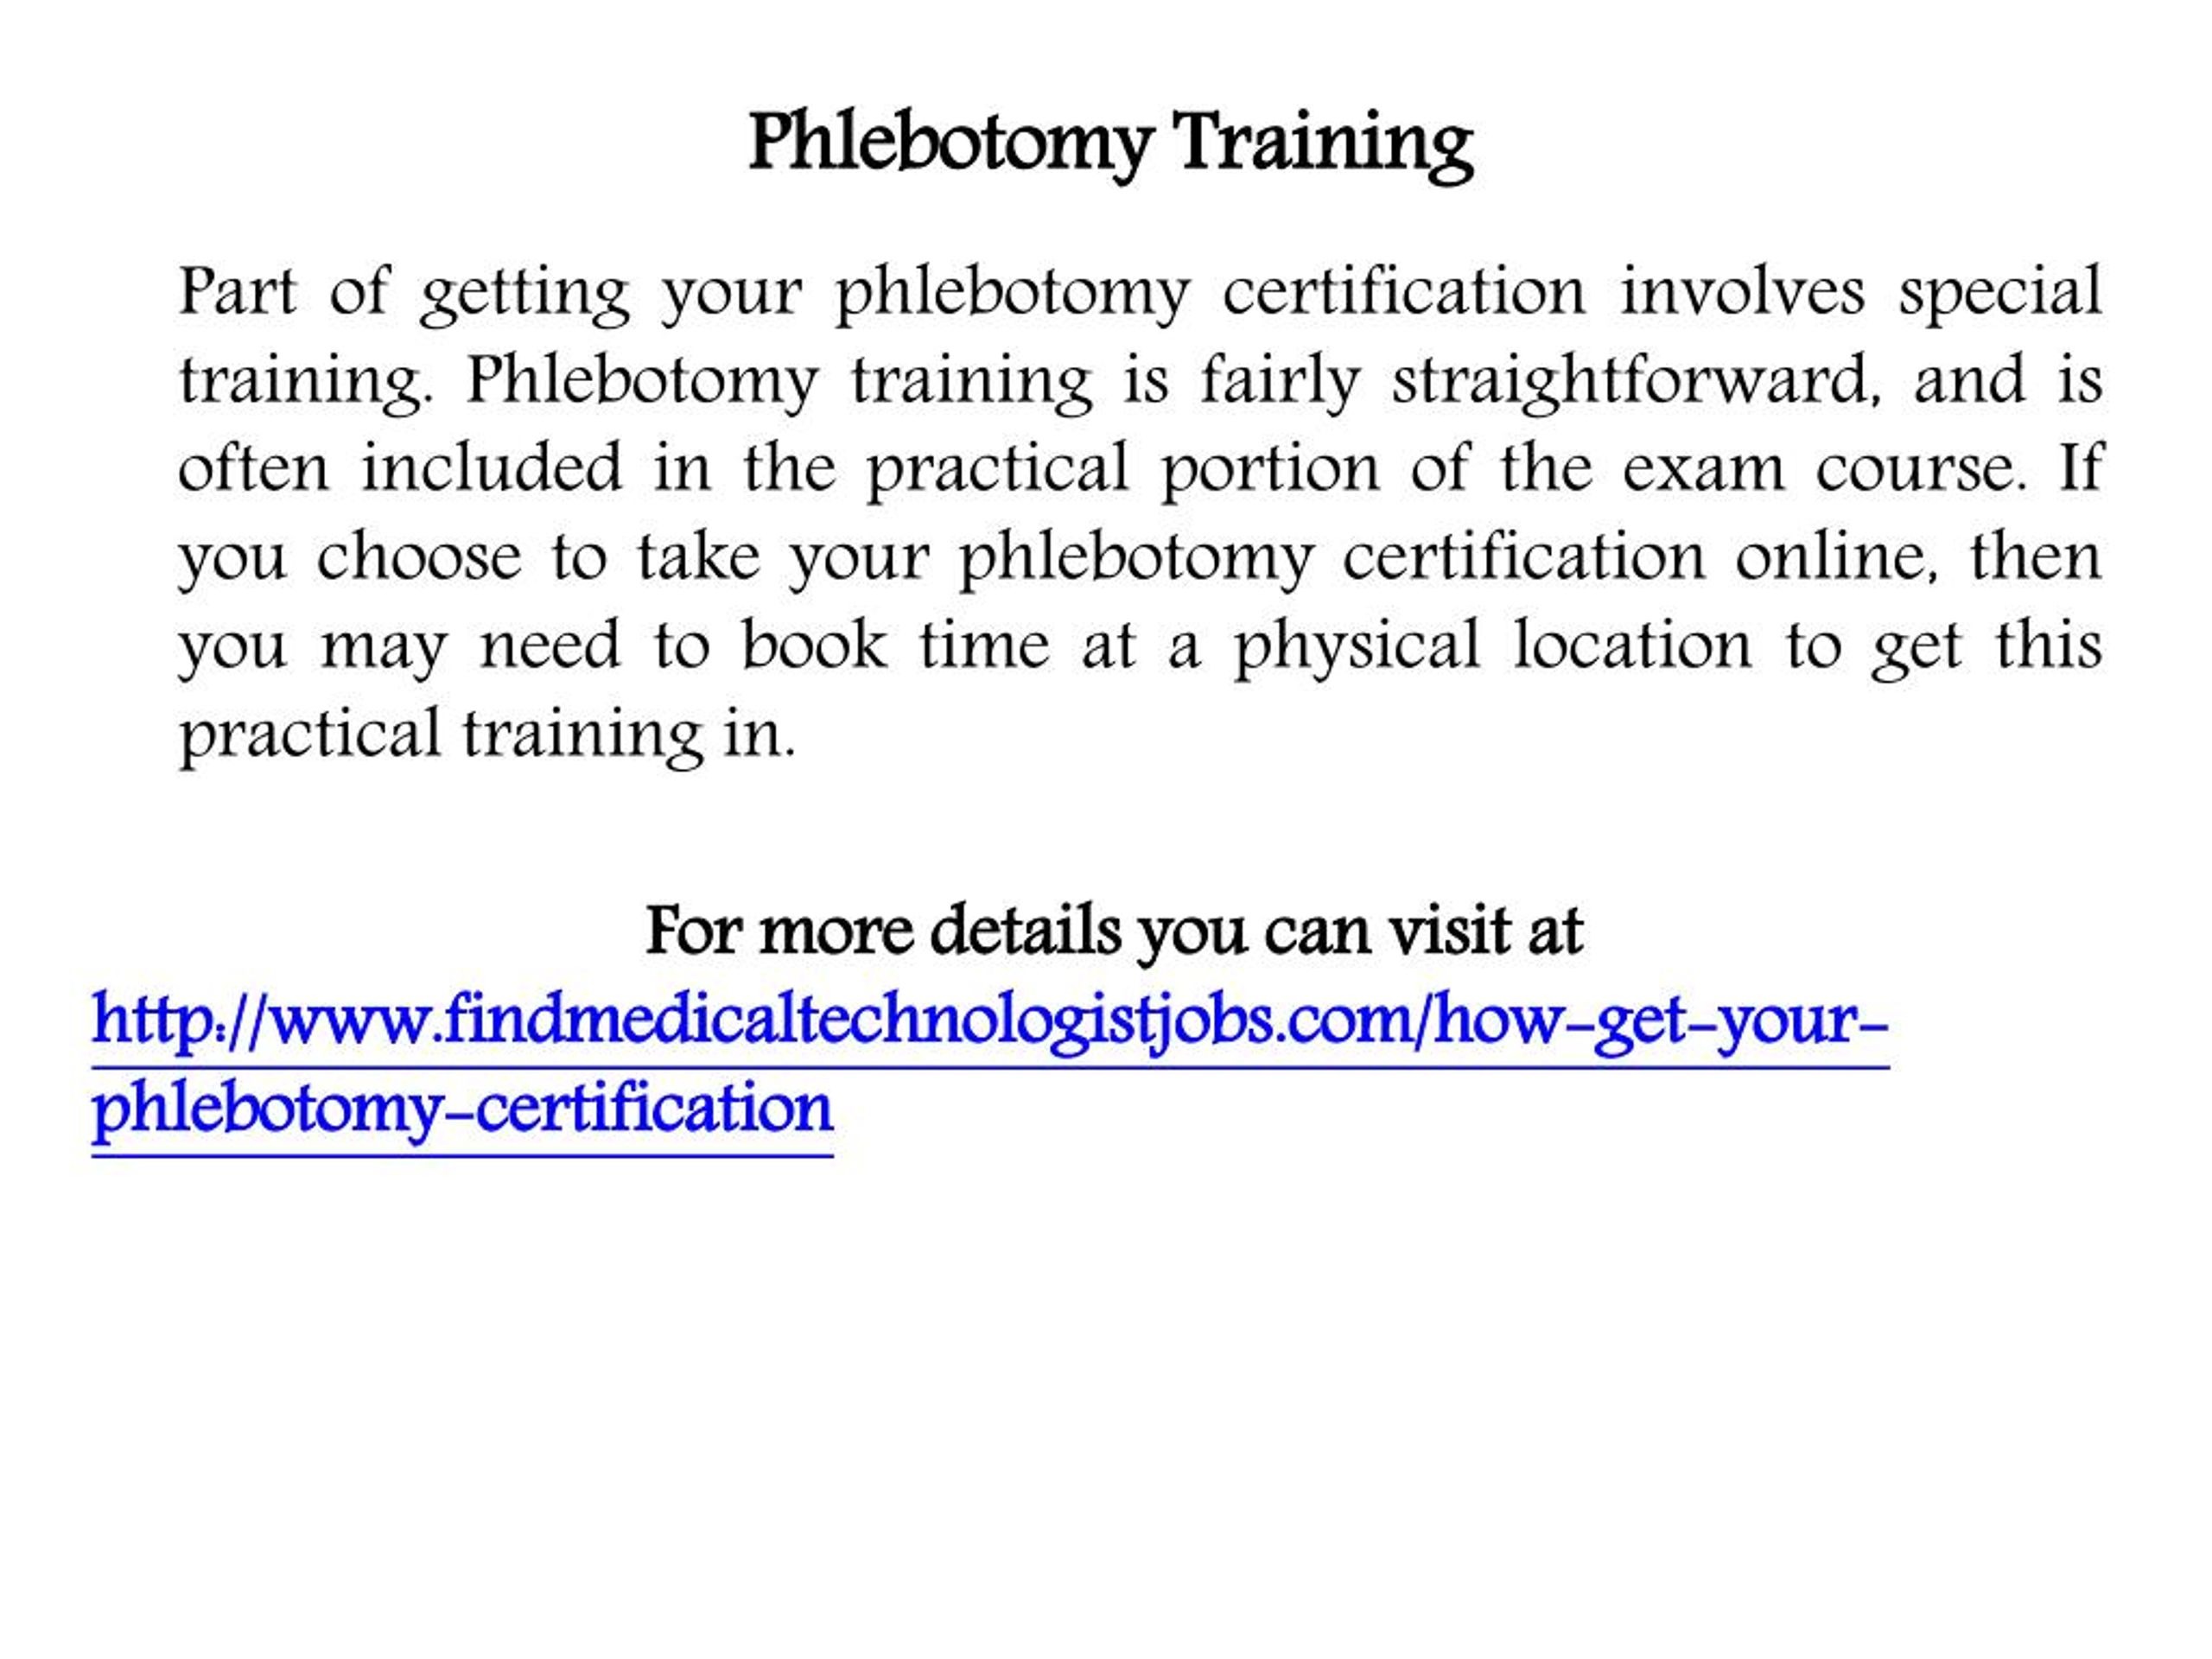 PPT How to Get Your Phlebotomy Certification Phlebotomy Classes